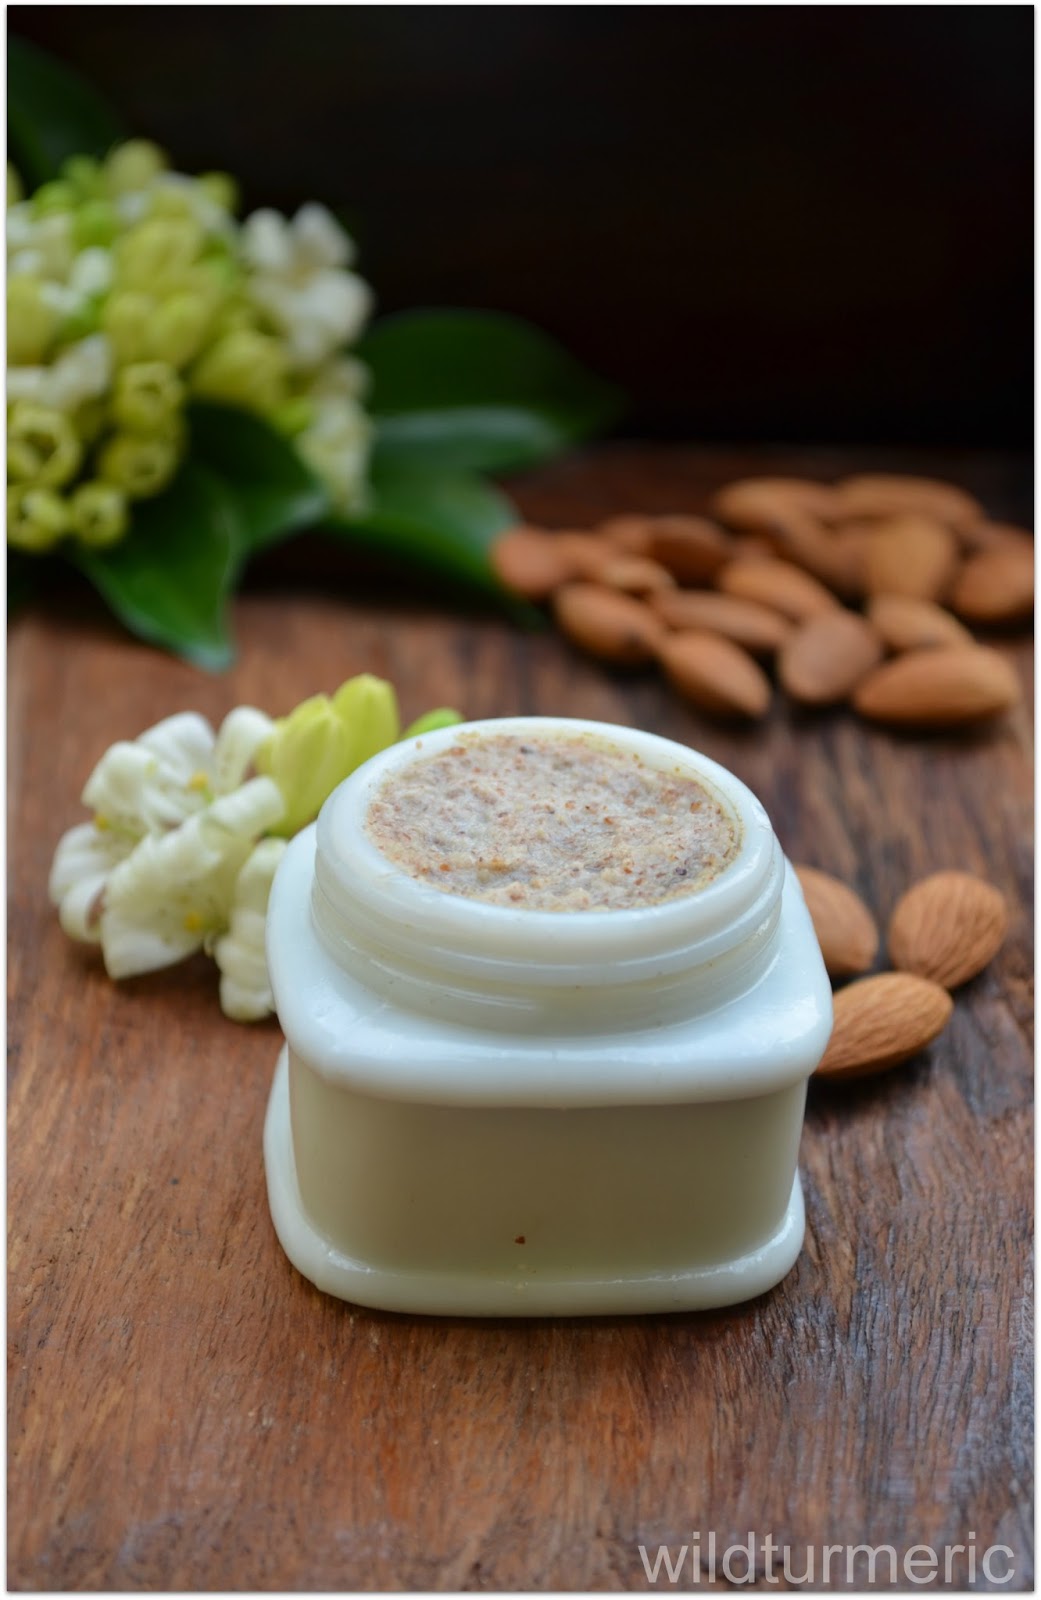 5 Best Benefits & Uses Of Almond Butter For Health, Skin, Hair & Weight Loss  - Wildturmeric